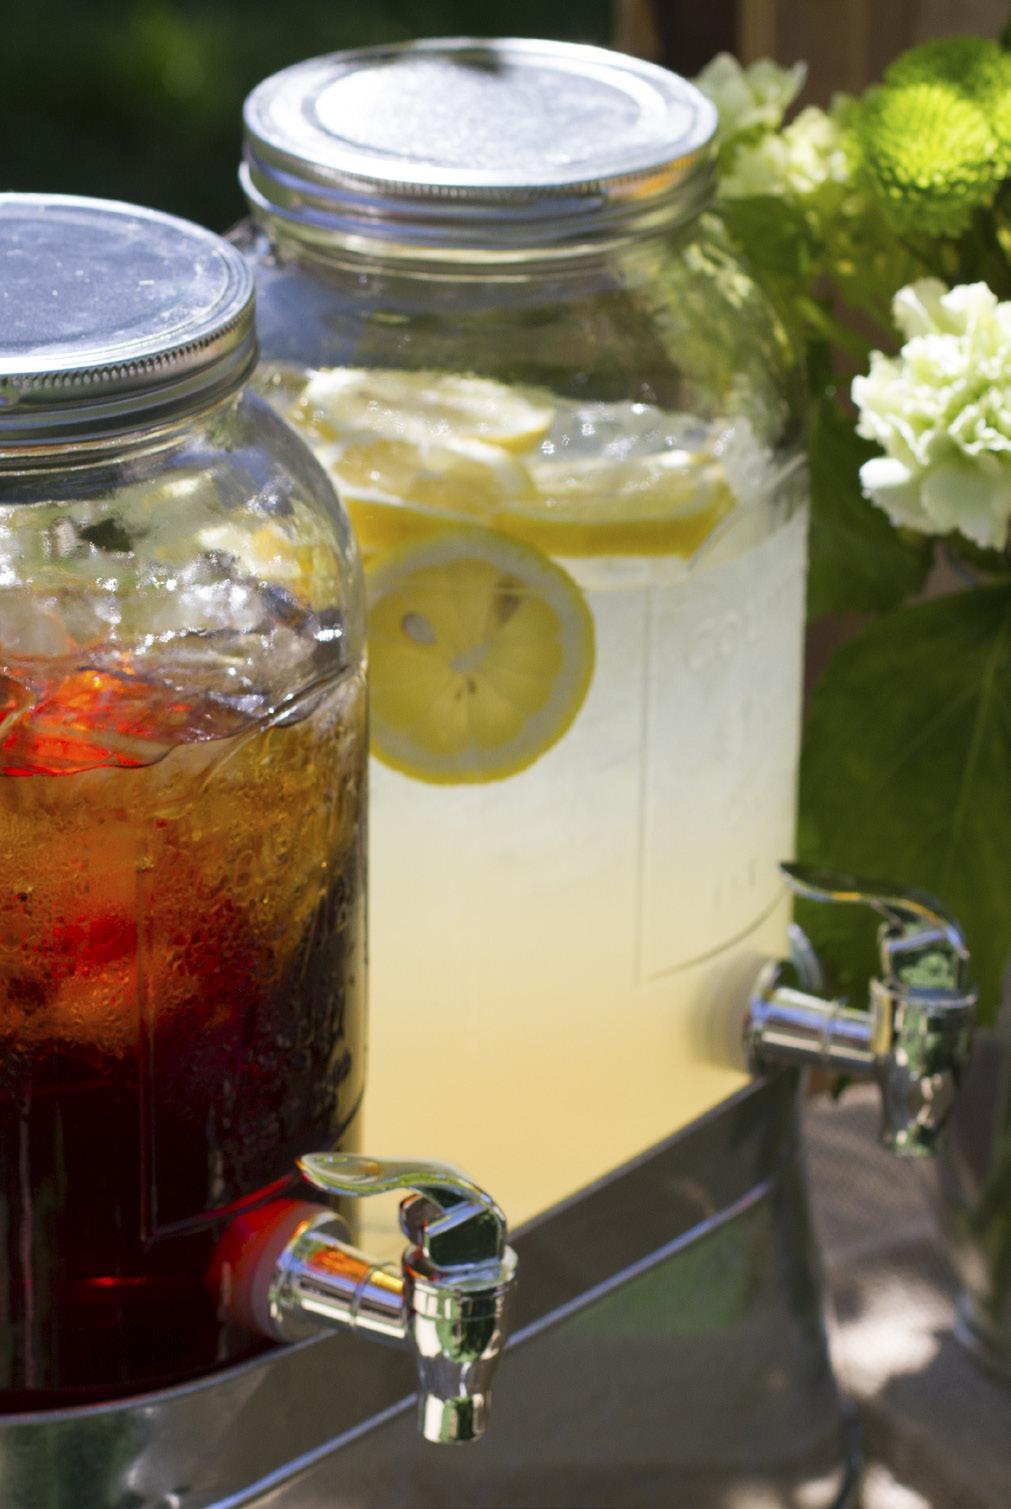 Island Rose Lemonade Yield: ½ Gallon of Lemonade 11 oz. Island Rose Premium Lemonade 53 oz. Water Directions: Stir the concentrate into chilled water. If desired, add ice.